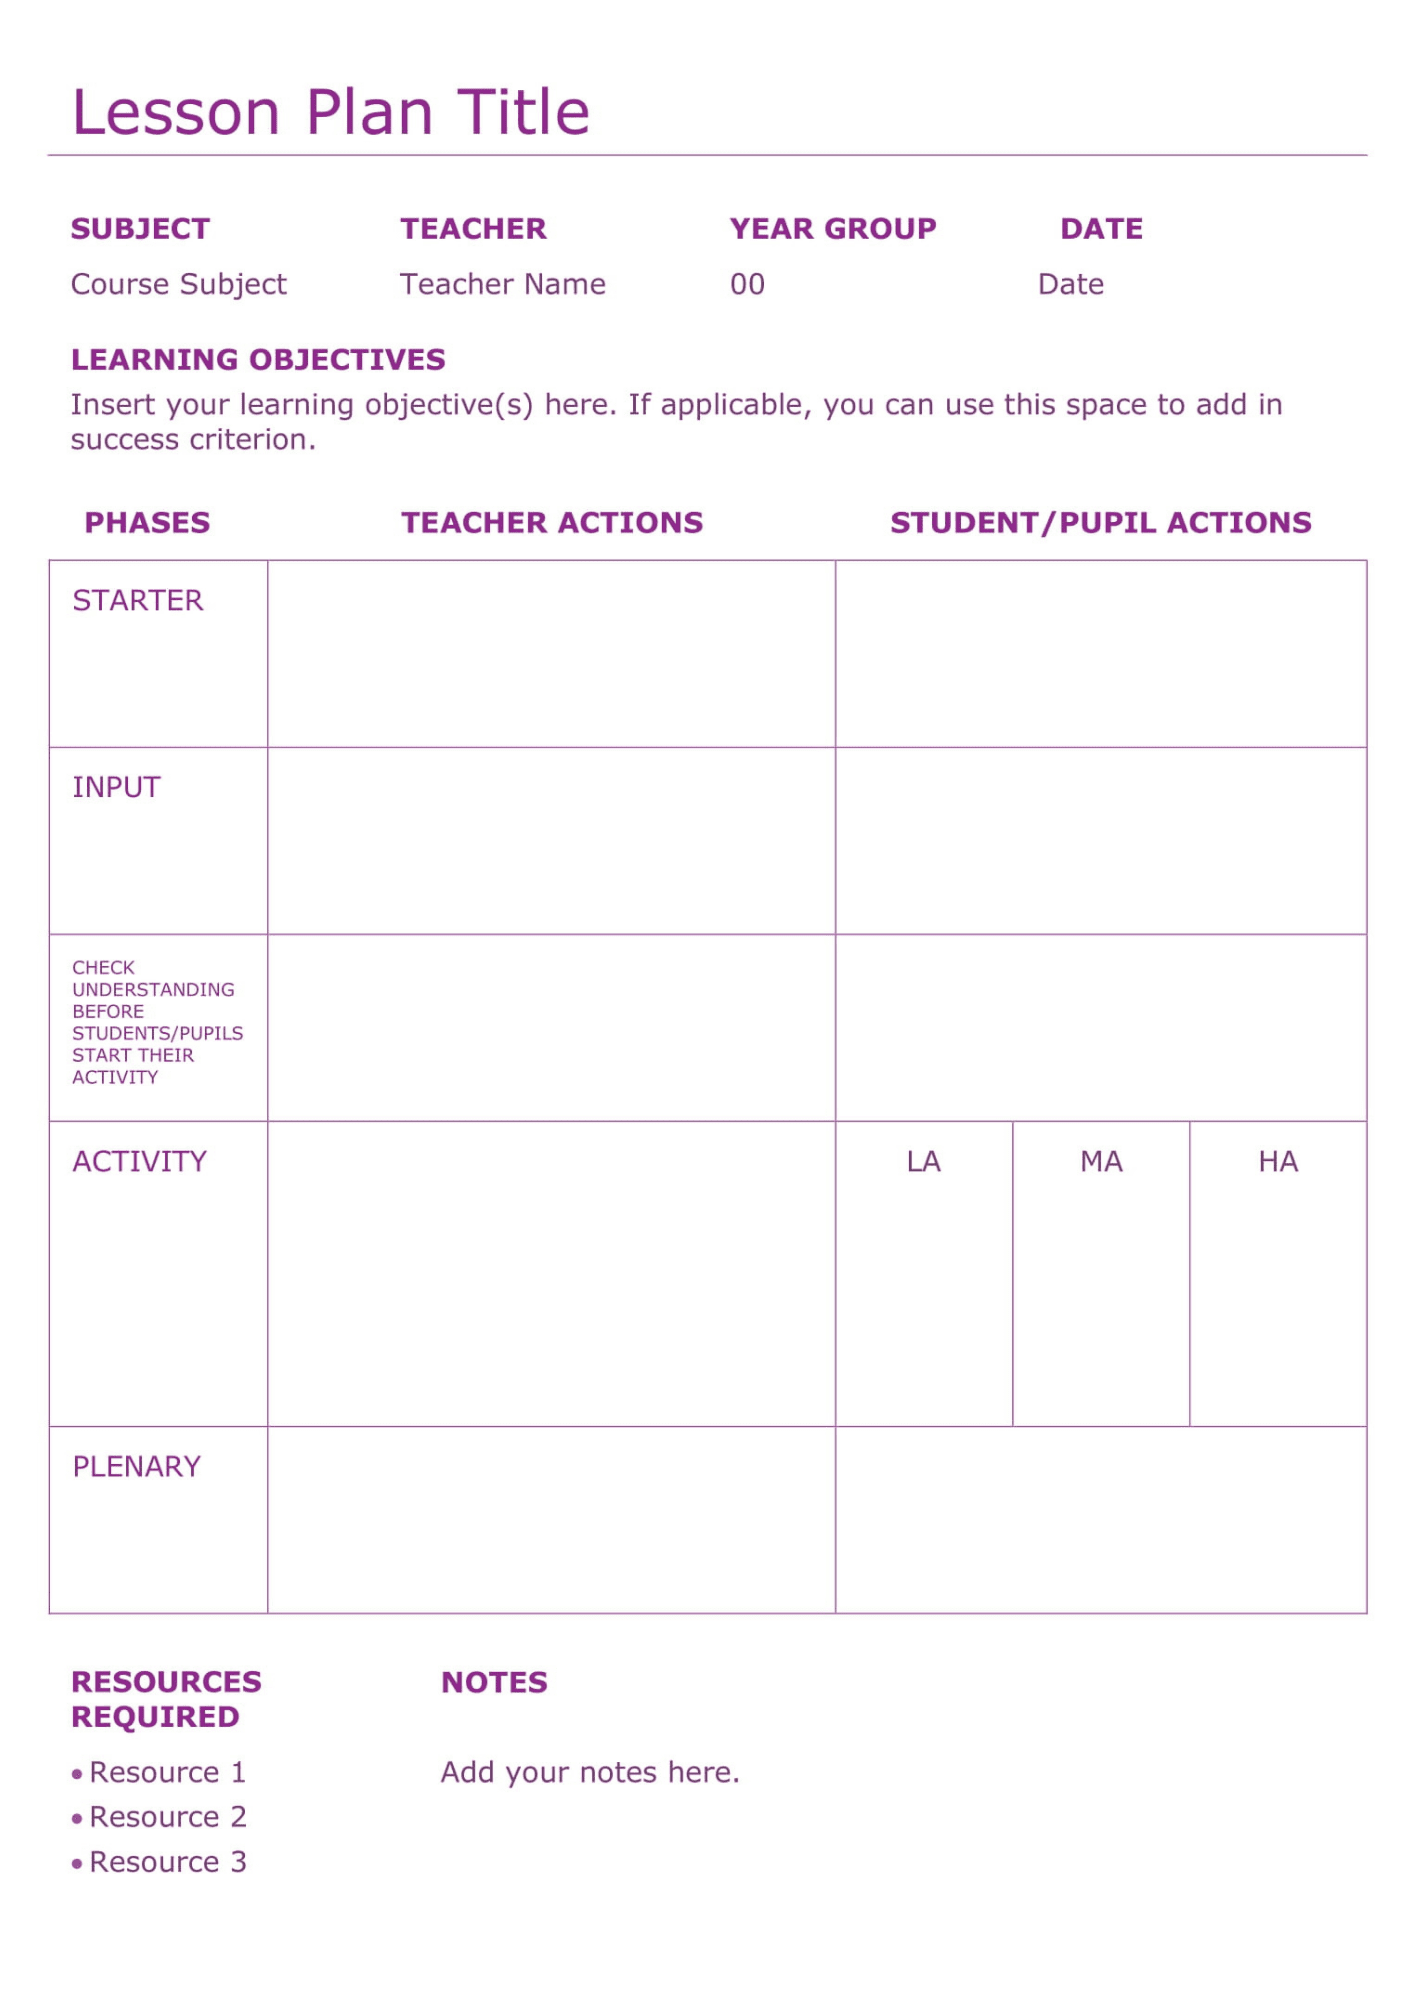 Editable Lesson Plan Template with Assessment Sheet for Effective Teaching